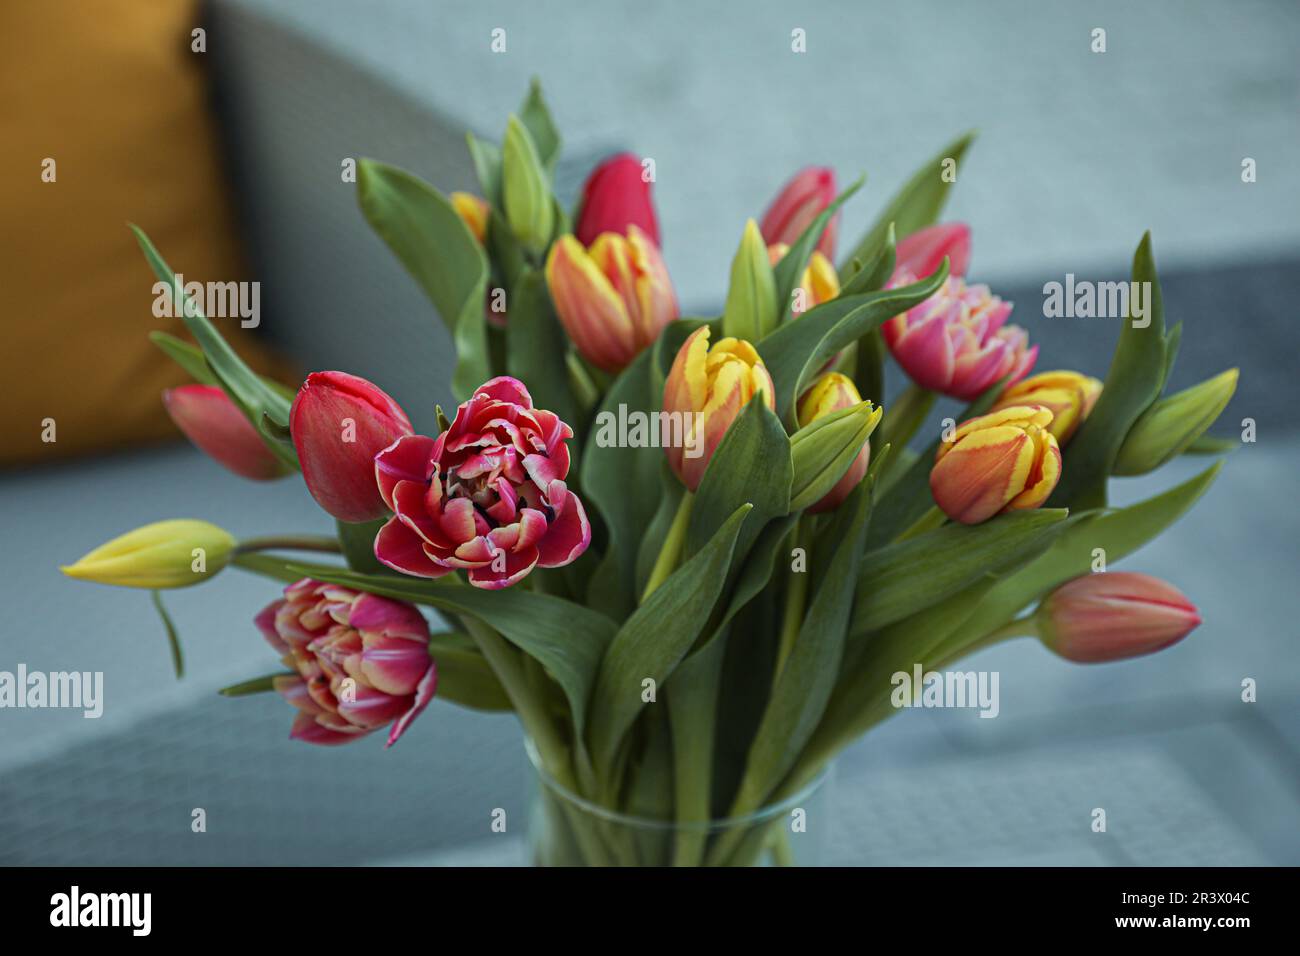 Beautiful bouquet of colorful tulips on blurred background Stock Photo